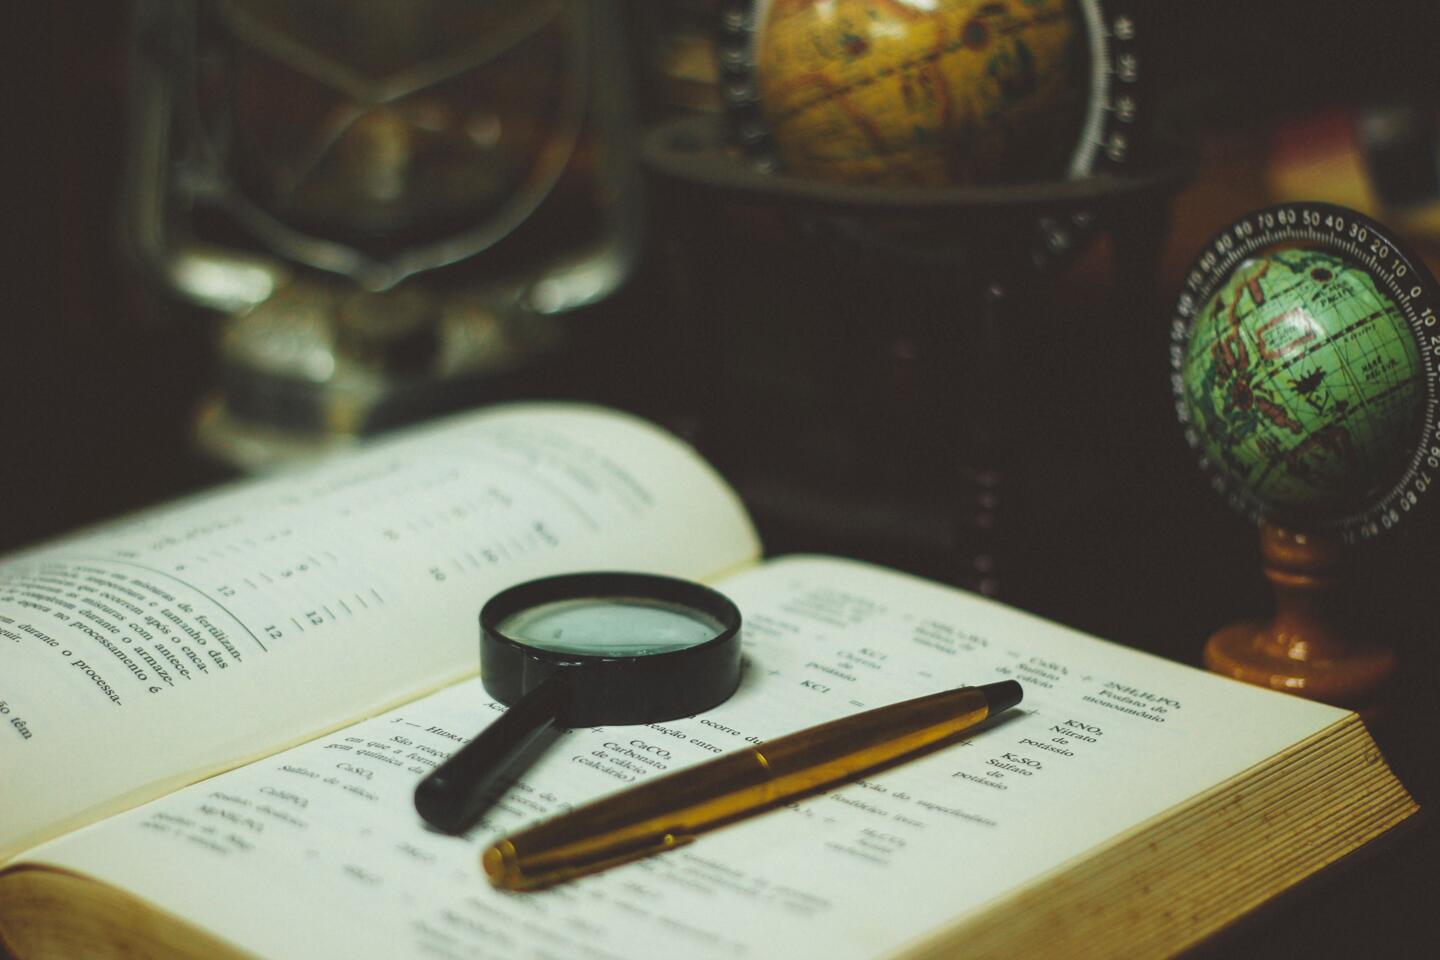 Antique book open with magnifying glass and pens, globes in the background, evoking historical exploration for the Rendez-Vous de l'Histoire.